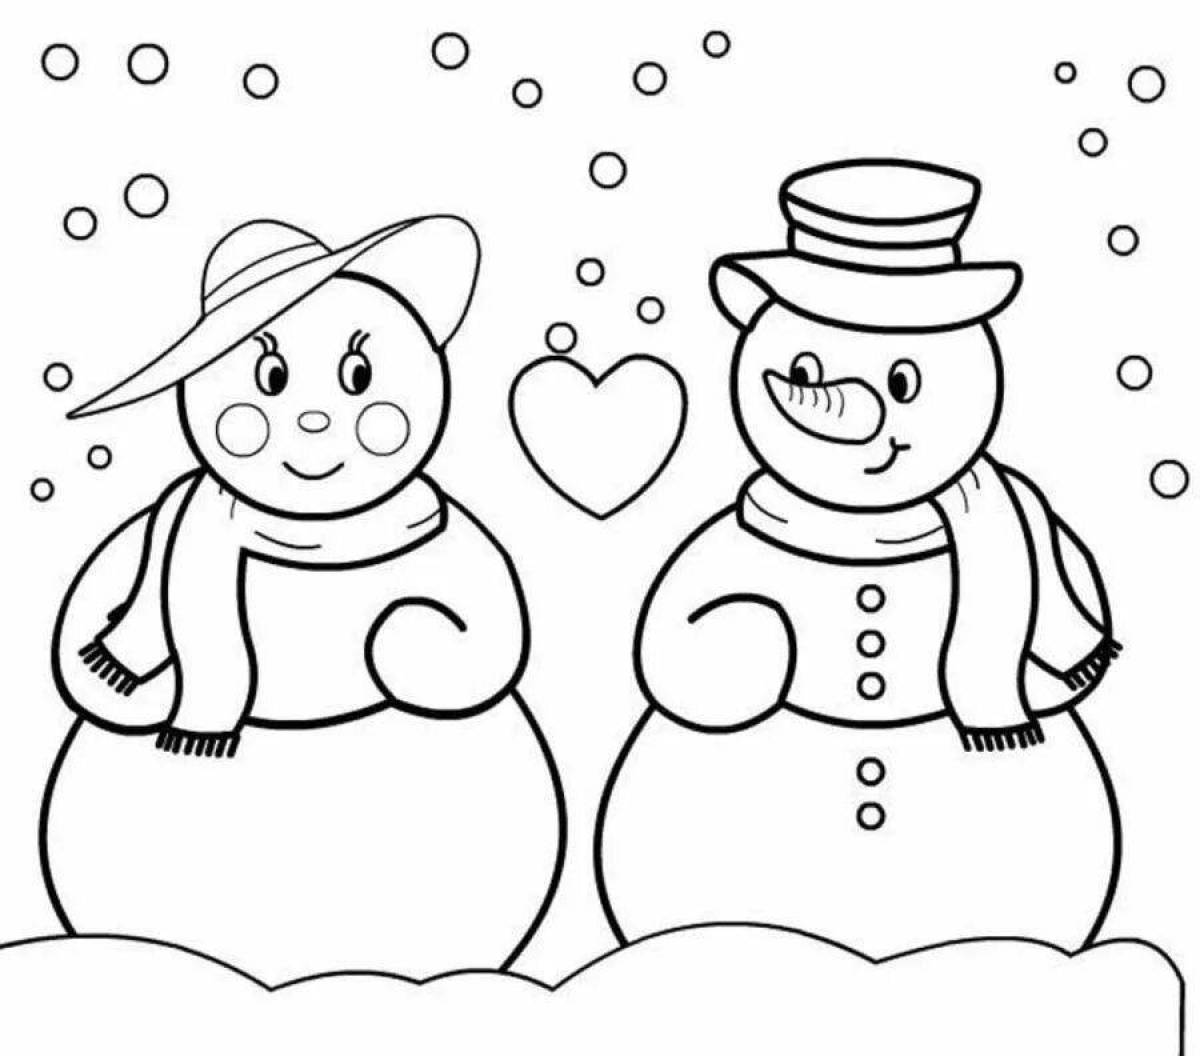 Giggly snowman coloring book for kids 6-7 years old